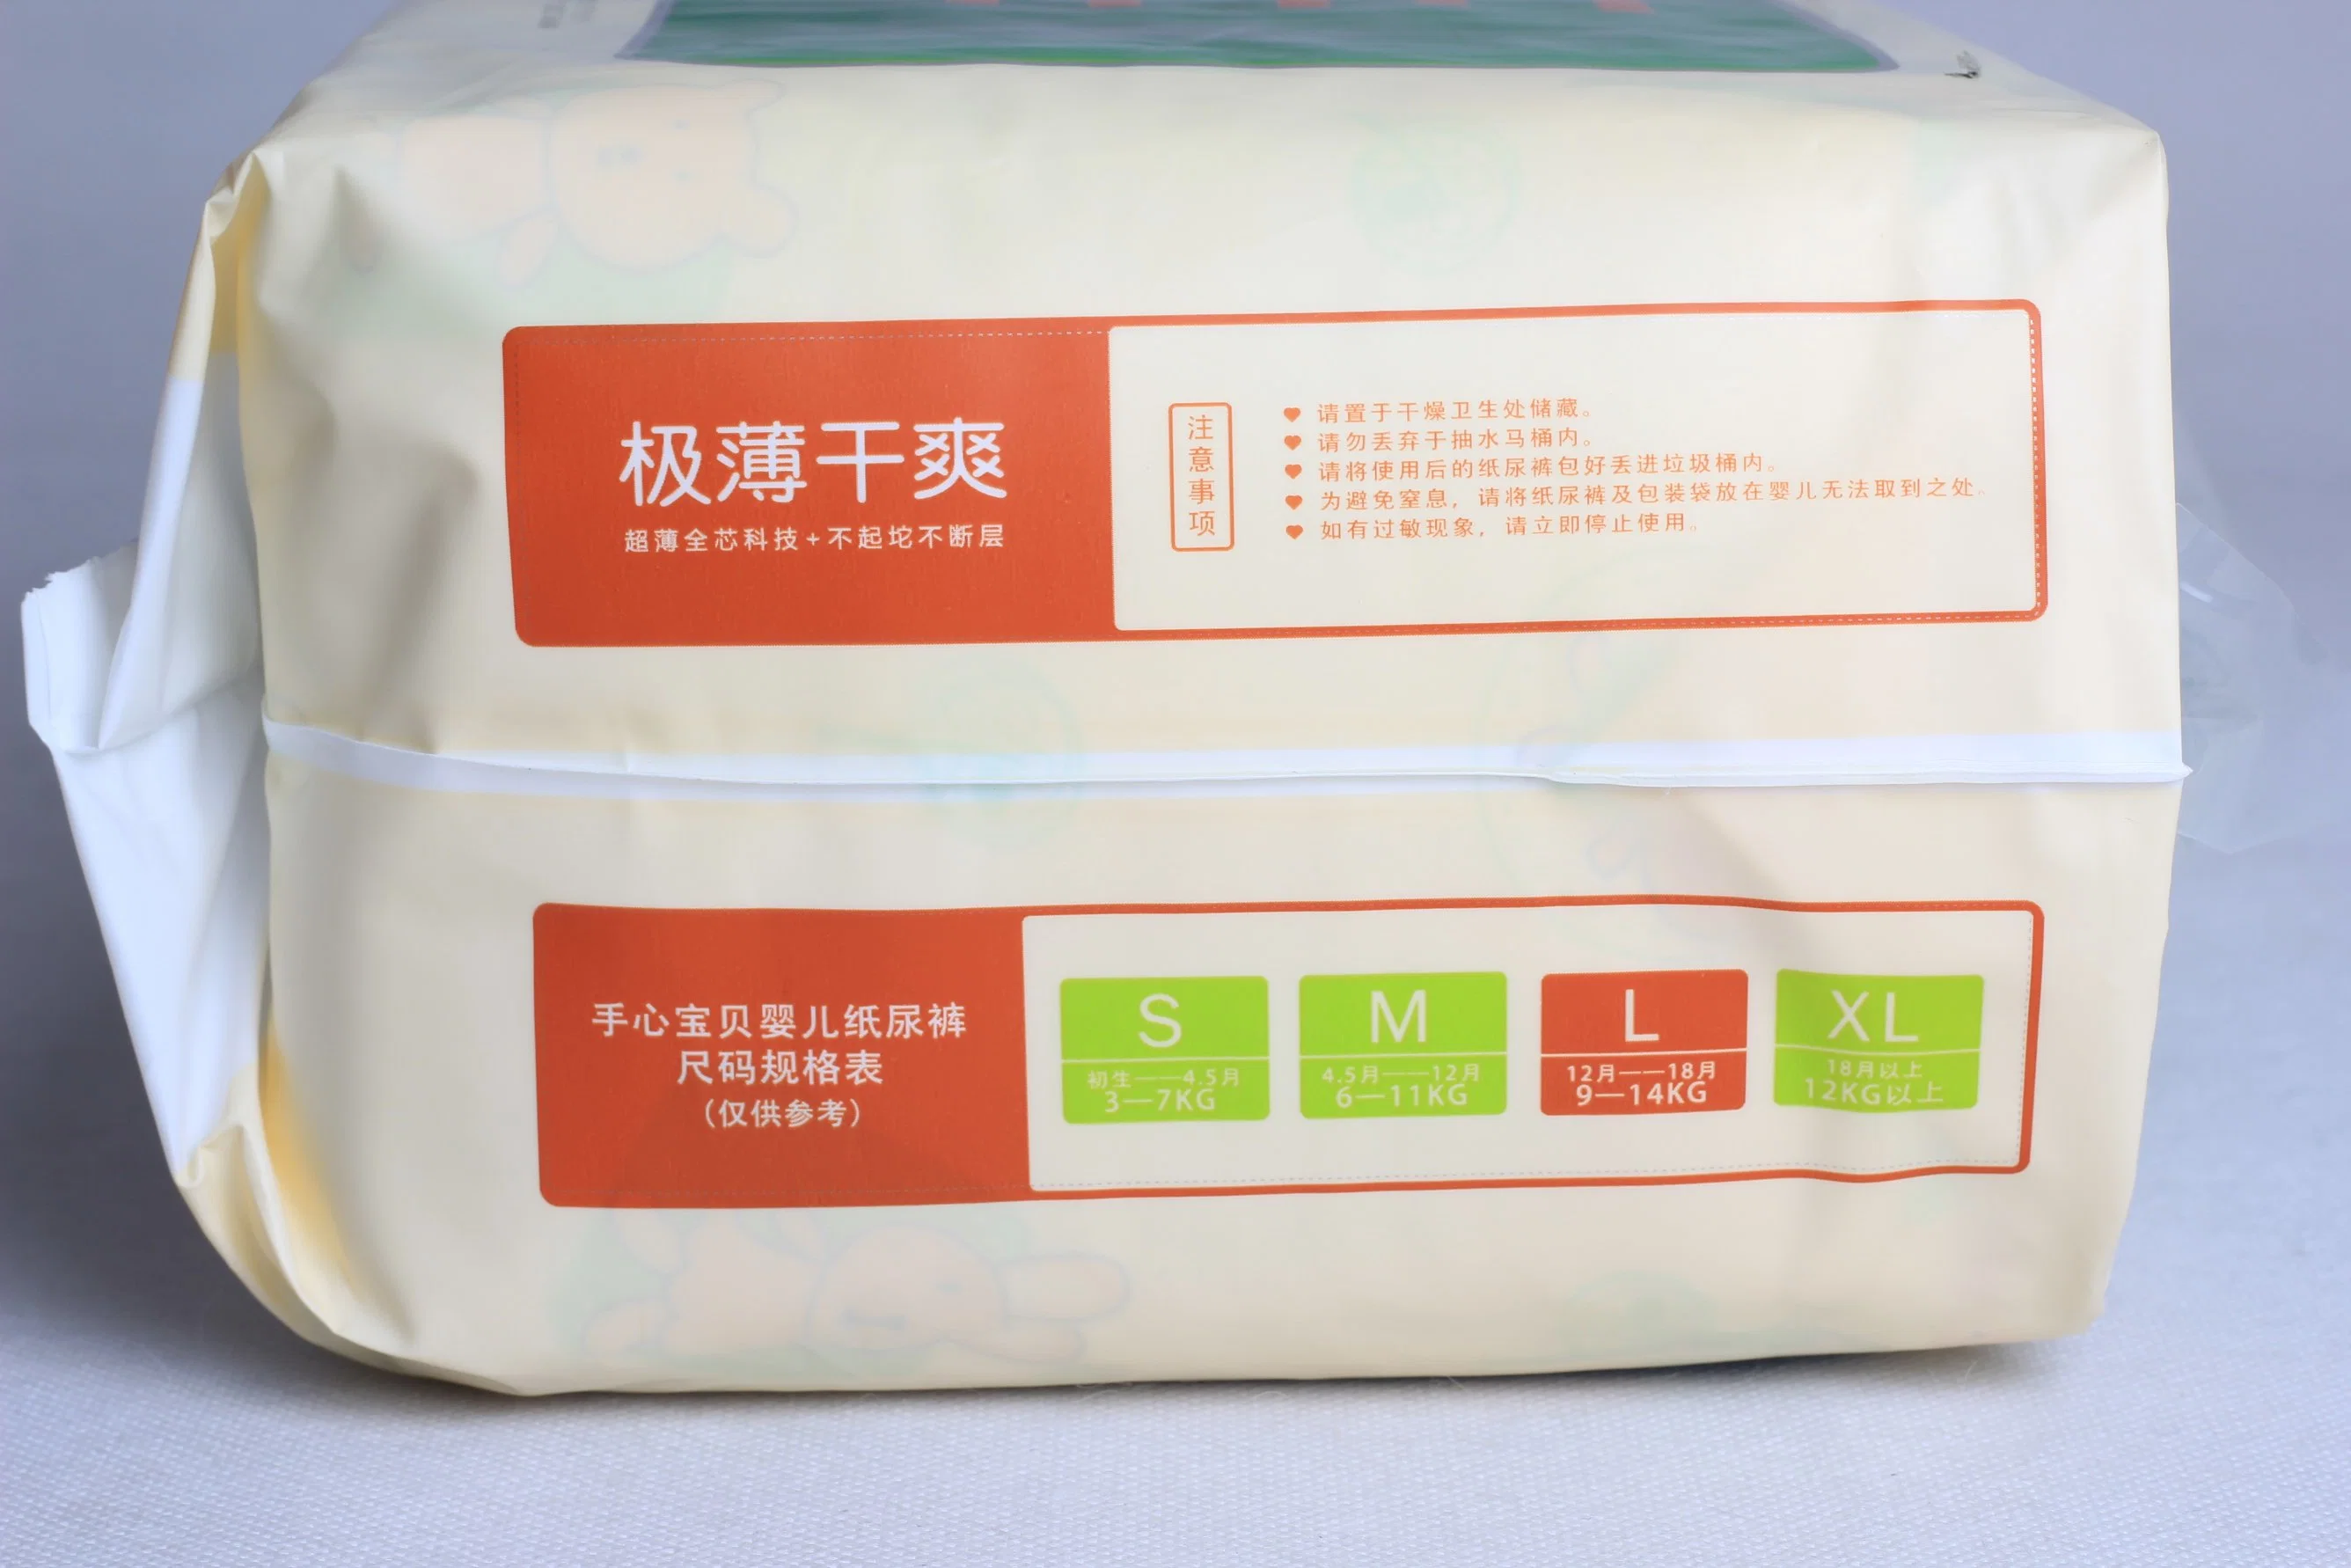 China Manufacturer of Baby Diaper